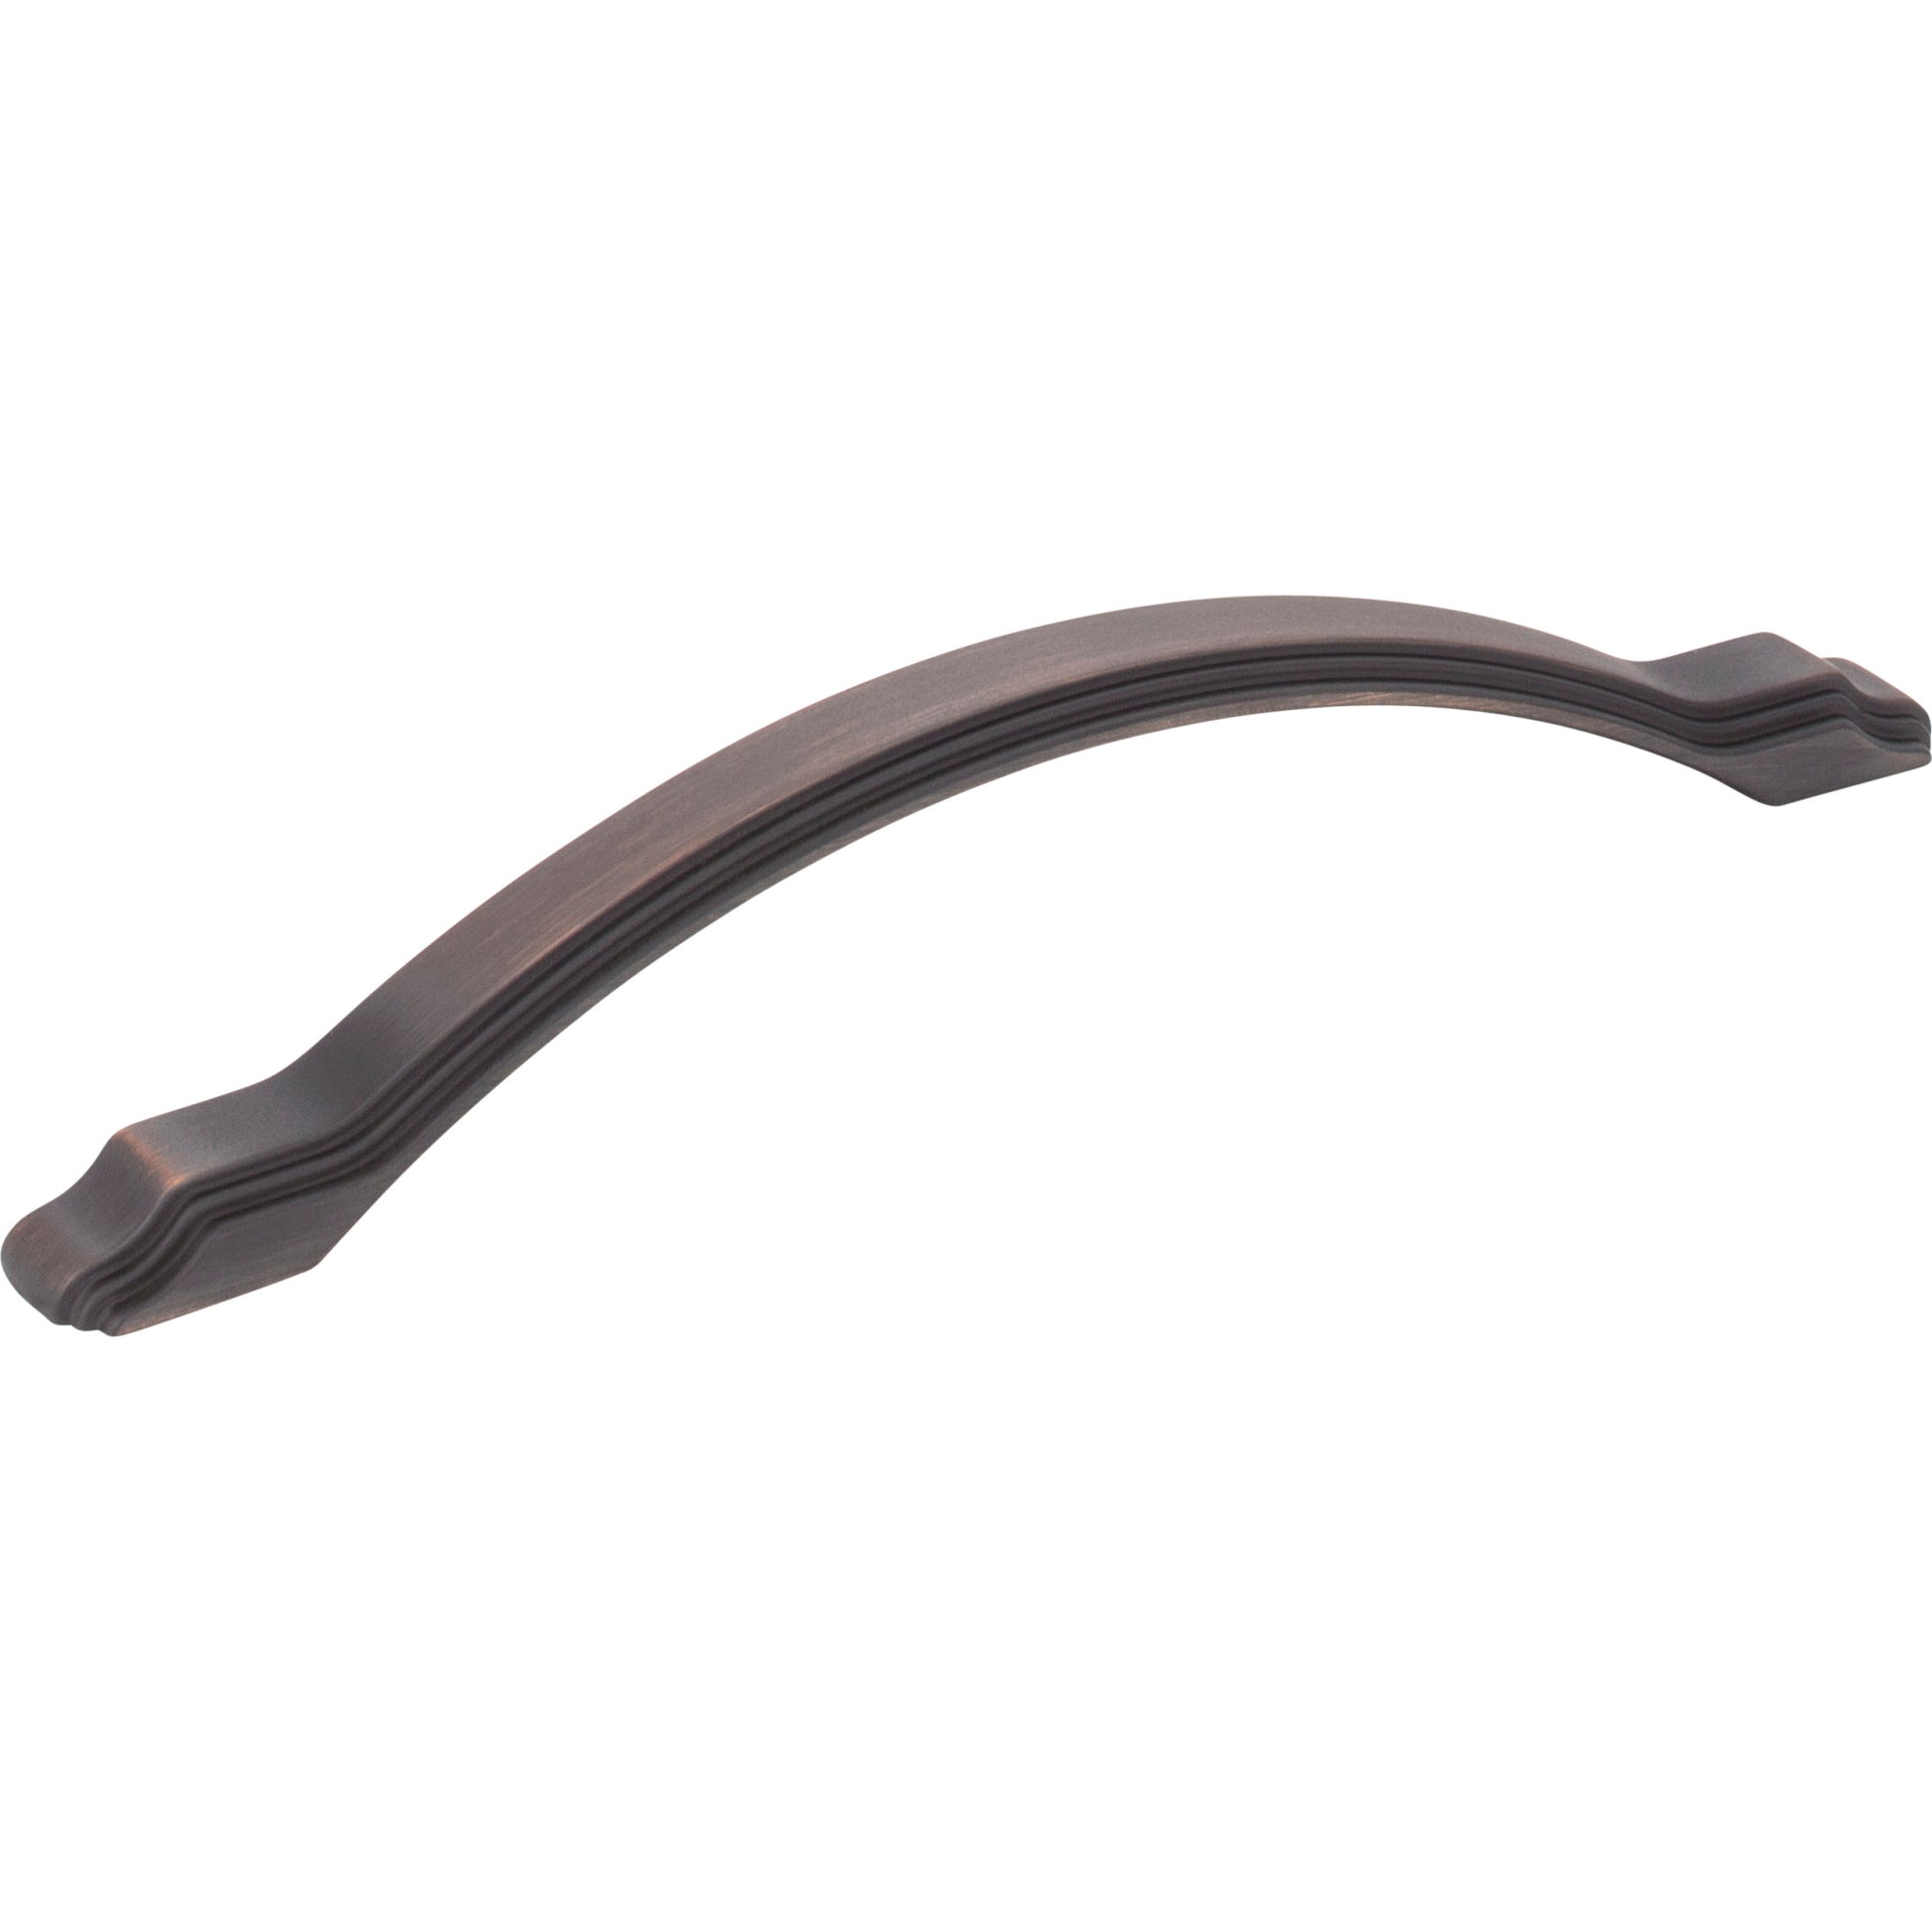 JEFFREY ALEXANDER 225-160DBAC 160 mm Center-to-Center Brushed Oil Rubbed Bronze Maybeck Cabinet Pull